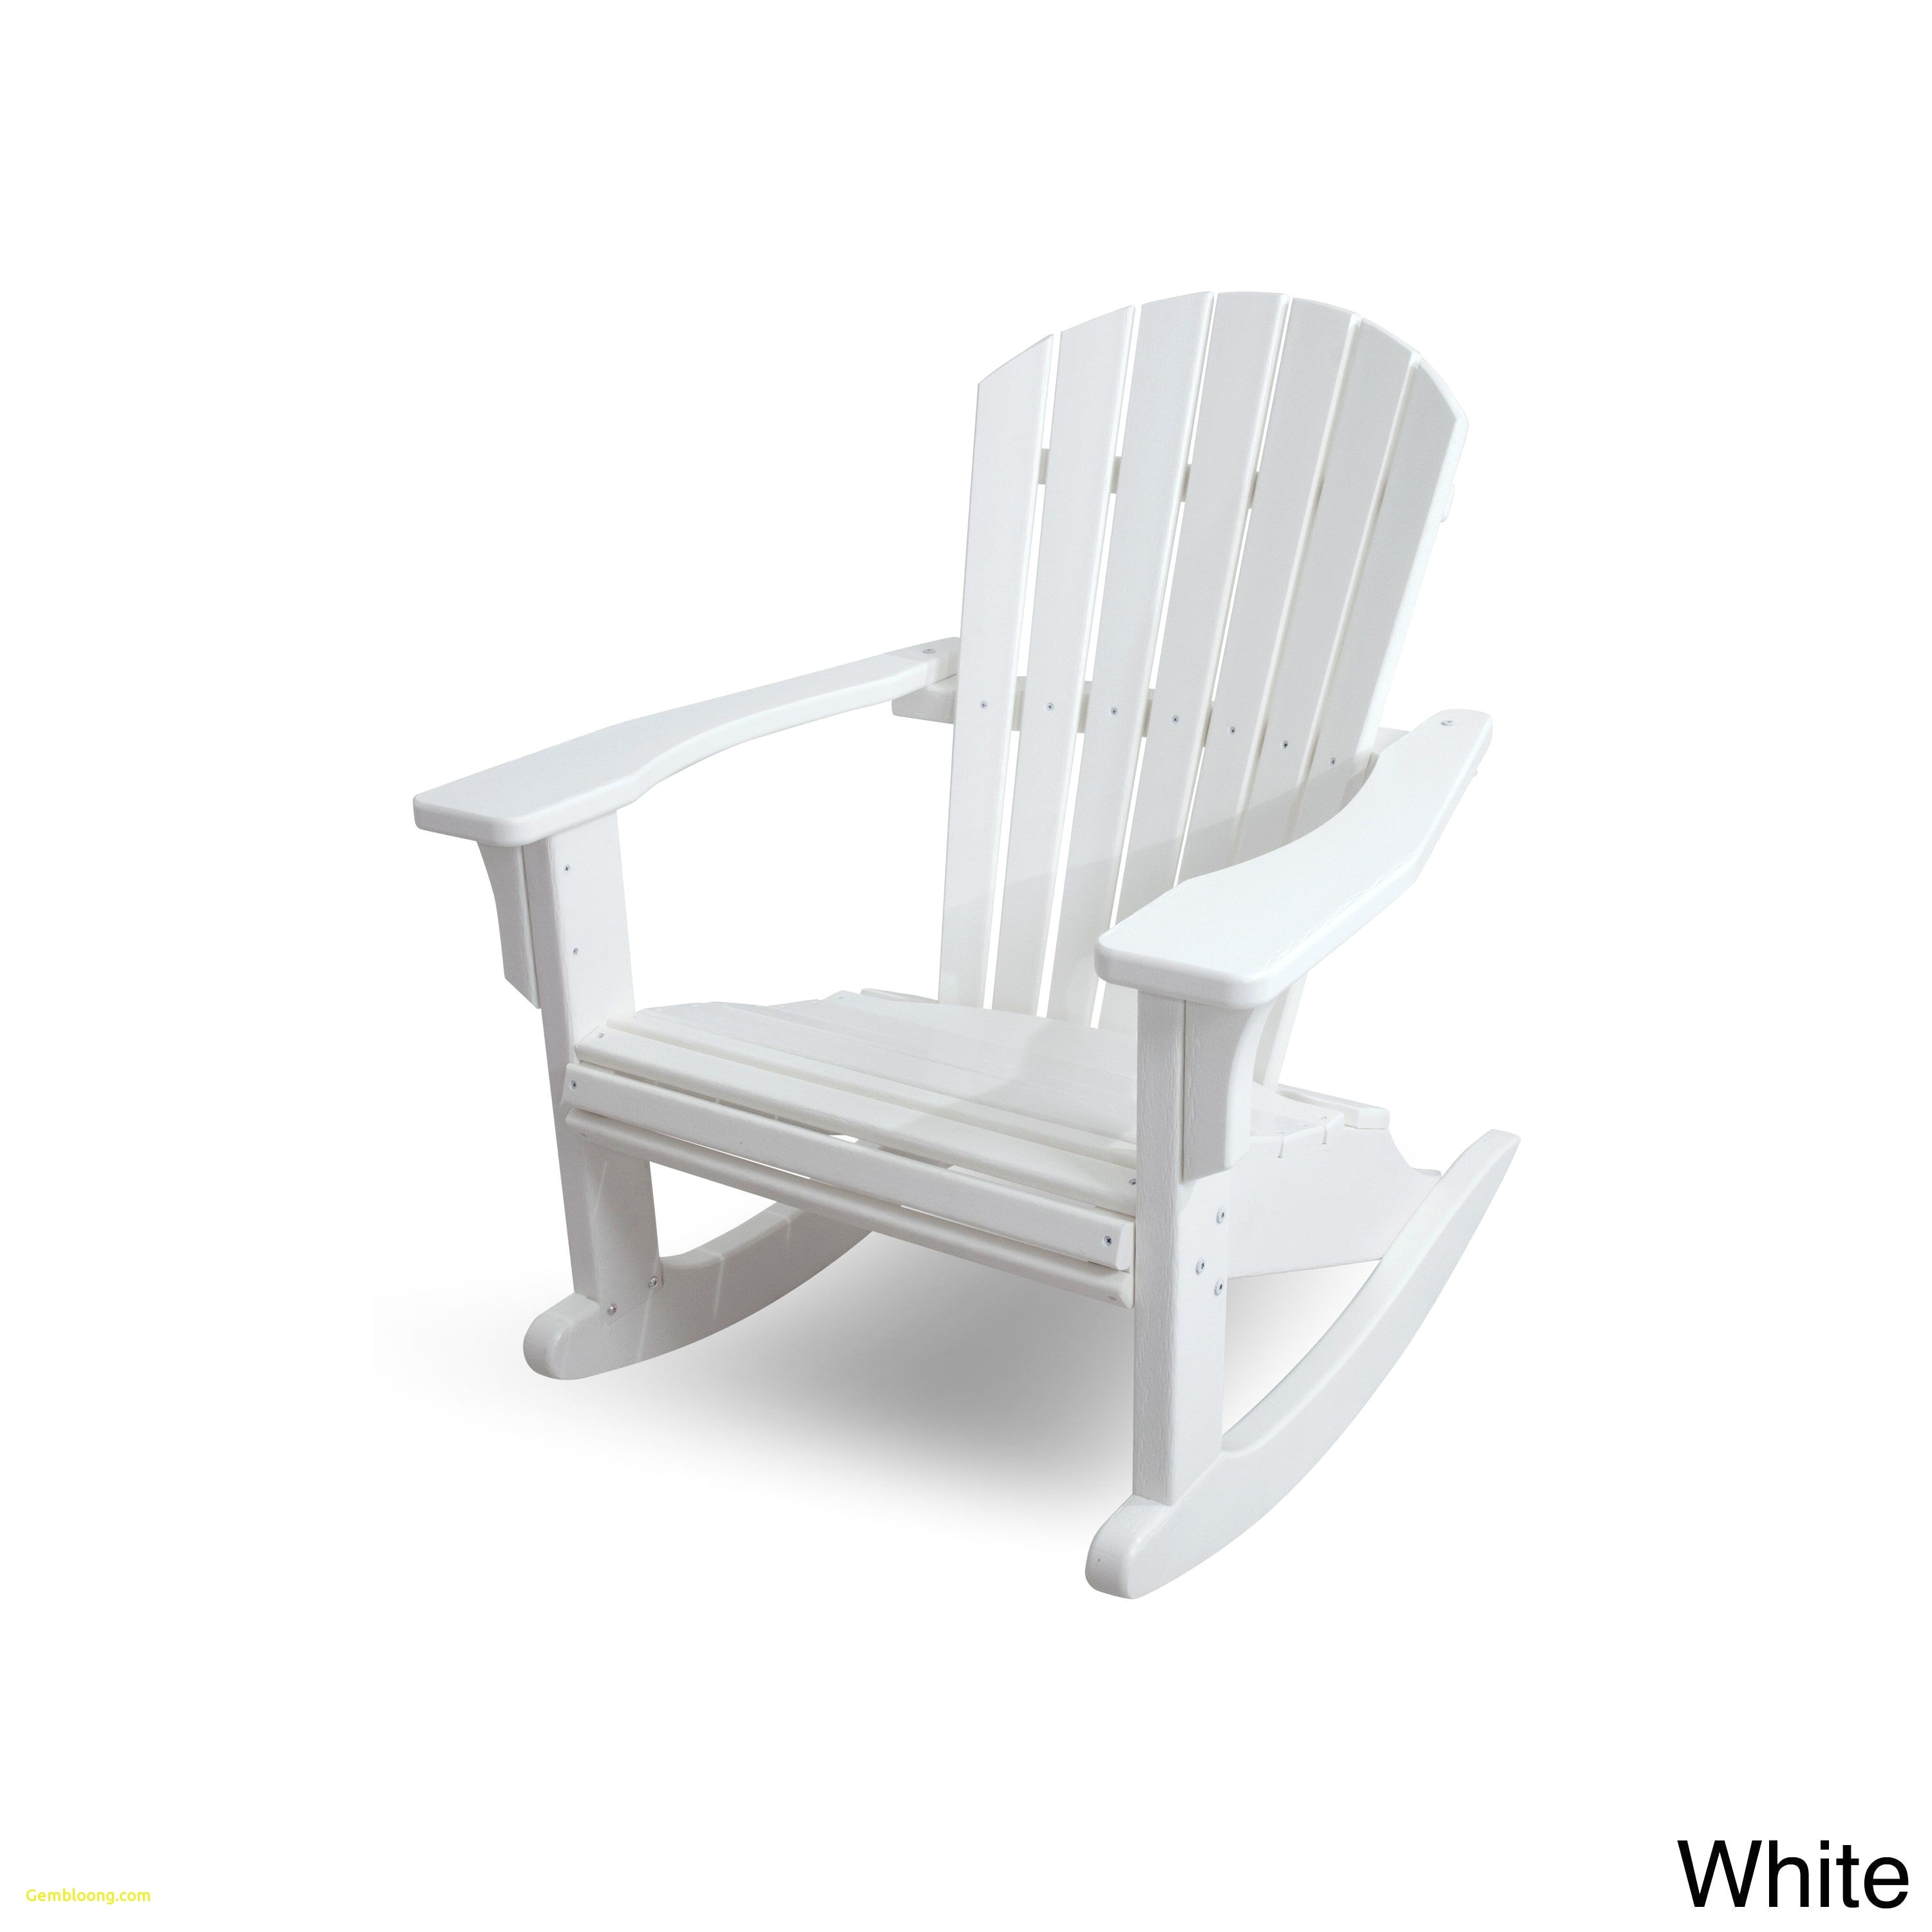 full size of home design white patio chairs inspirational plastic patio set new luxurios wicker large size of home design white patio chairs inspirational